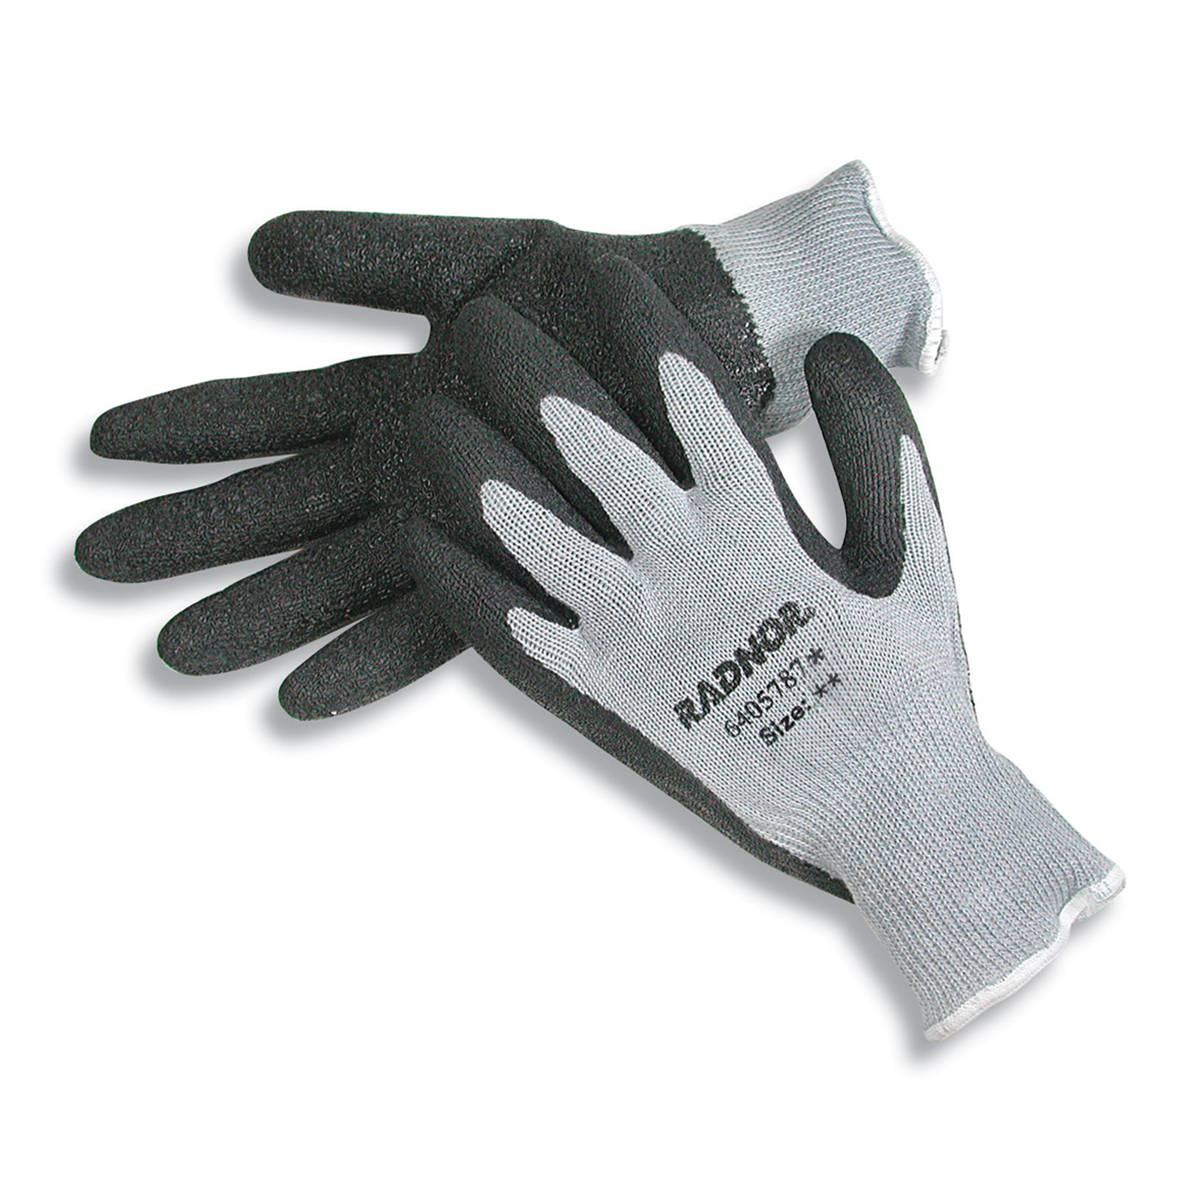 RADNOR® X-Large 10 Gauge Dark Gray Latex Palm And Fingertip Coated Work Gloves With Gray Acrylic, Cotton And Polyester Liner And